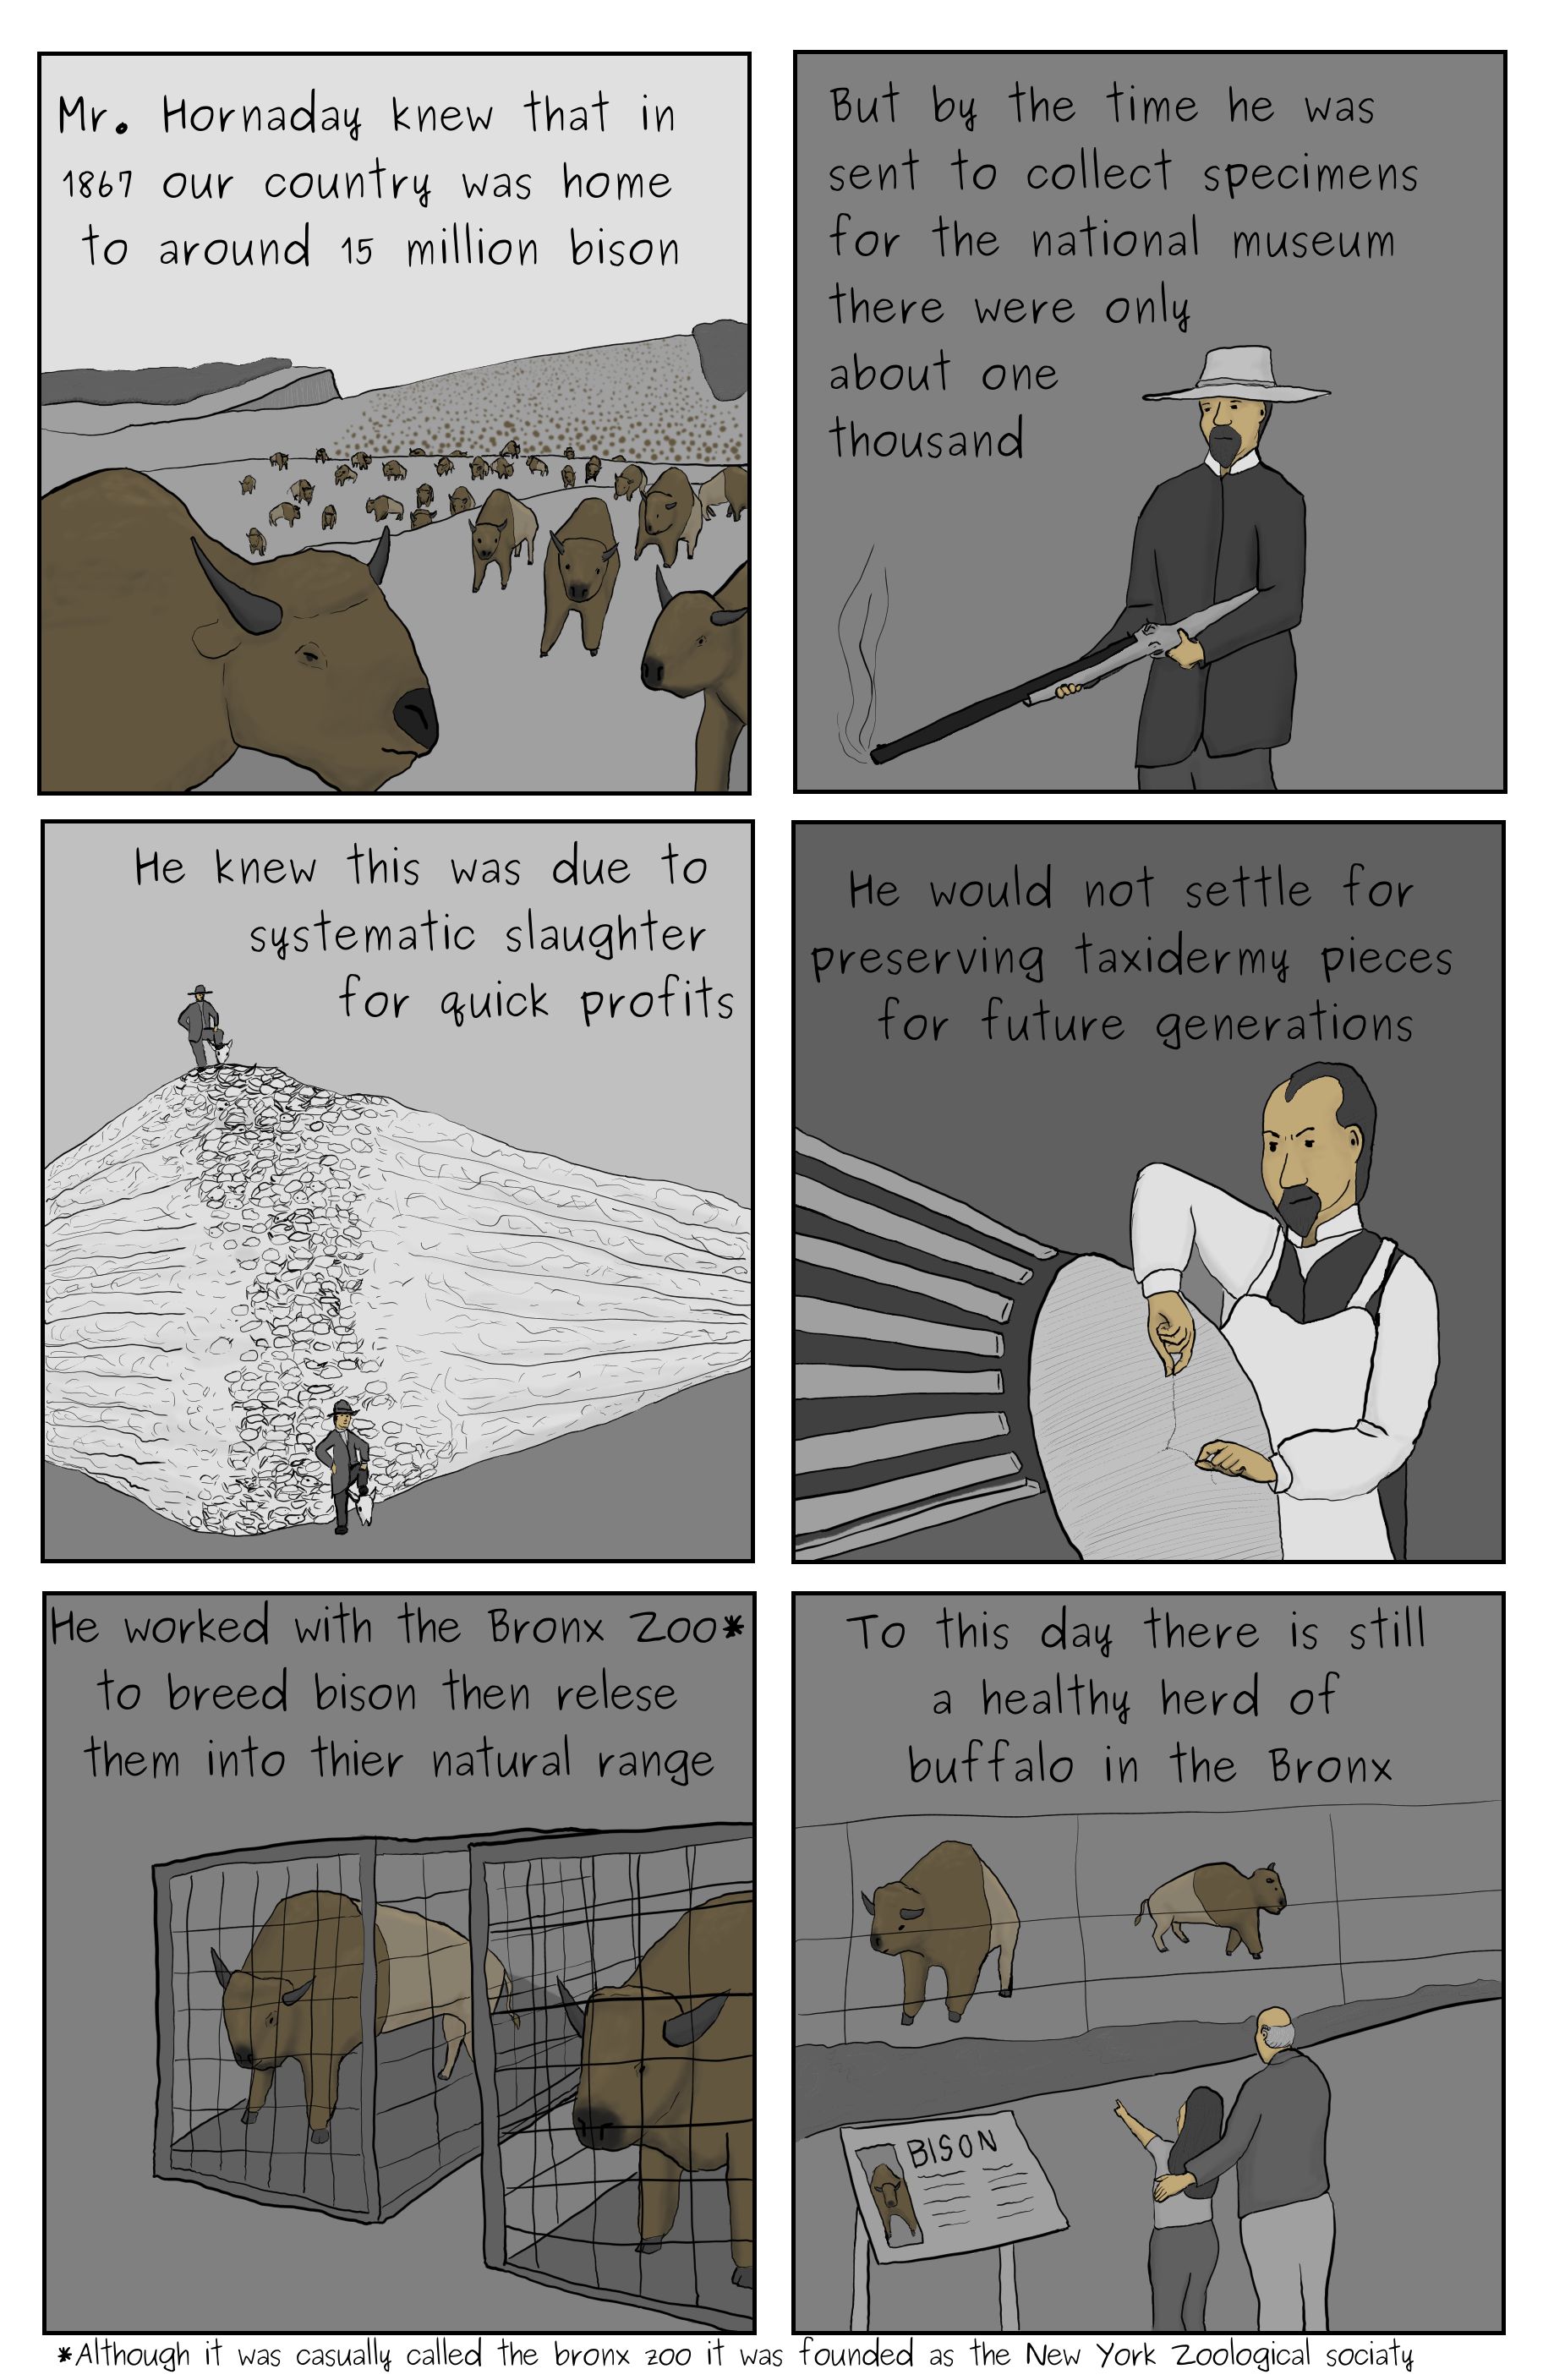 A comic featuring a wild herd of buffalo stretching to the horizon, William Hornaday after firing a rifle and preparing a taxidermy bison, a large pile of buffalo skulls with two men posing with the immense collection, bison being moved in small cages, and a father and daughter enjoying the buffalo at the Bronx Zoo.